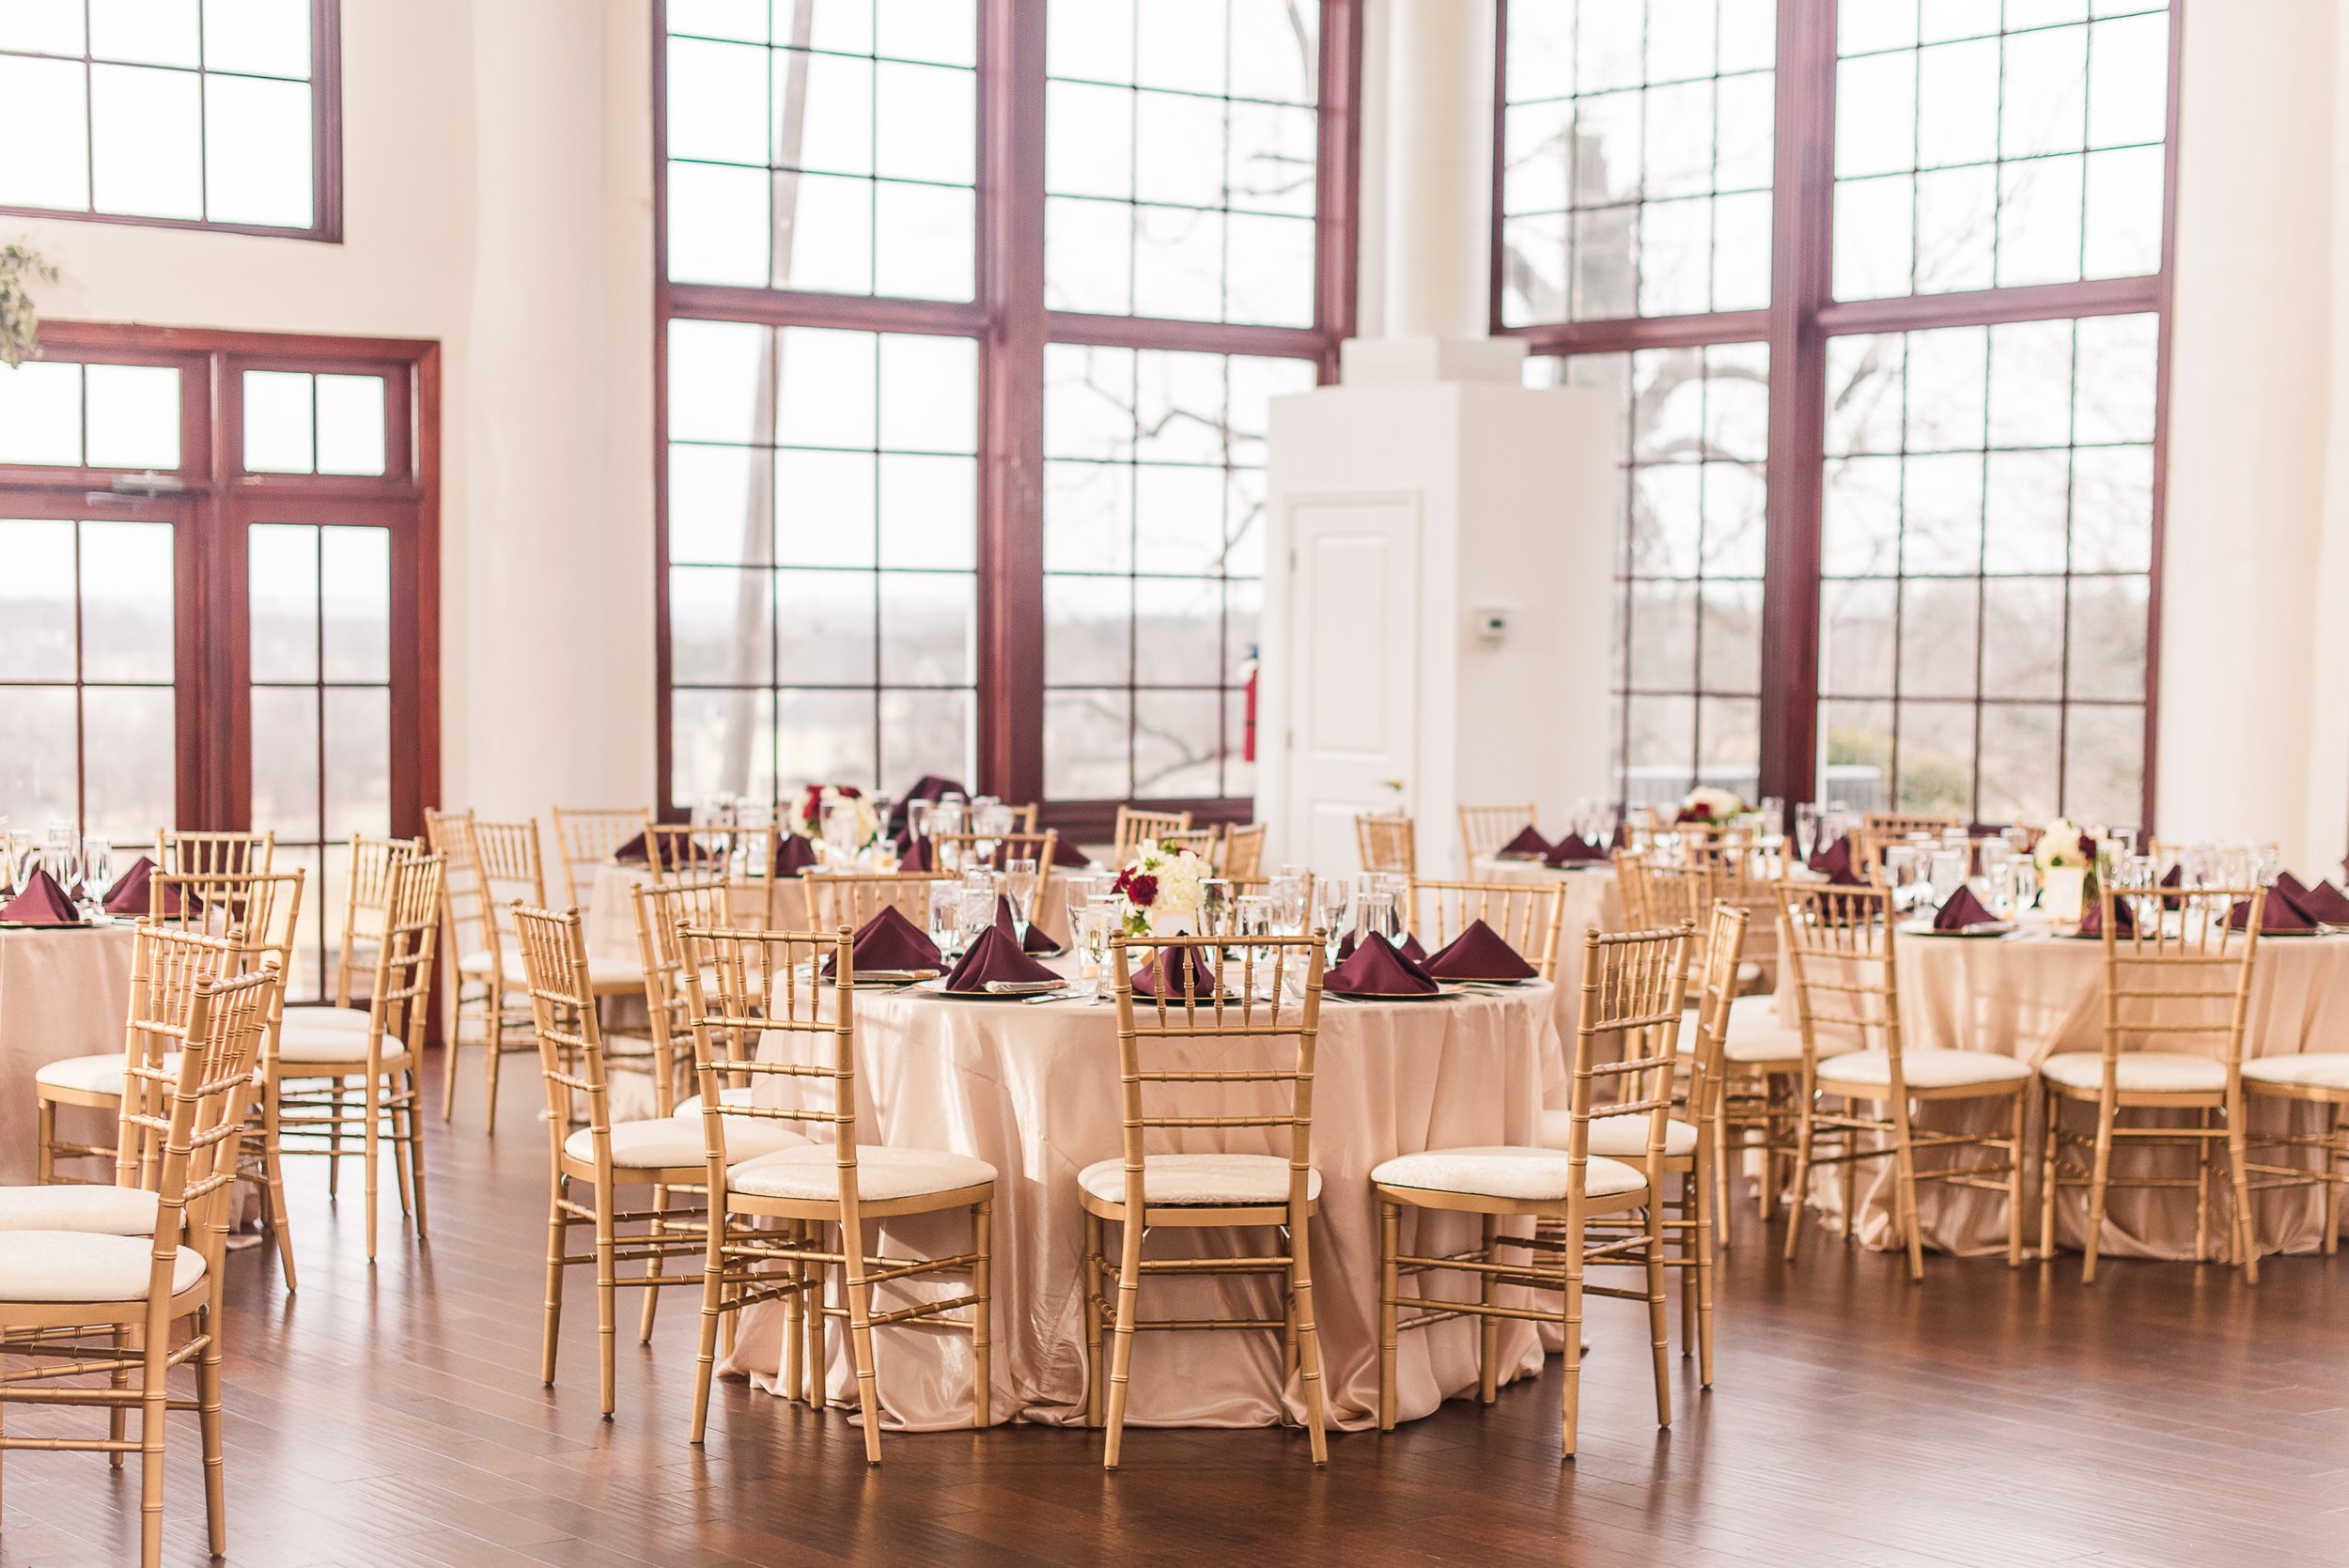 Tables are set with gold chiavari chairs and gold tablecloths inside the ballroom reception space for a wedding at Raspberry Plain Manor in Northern Virginia